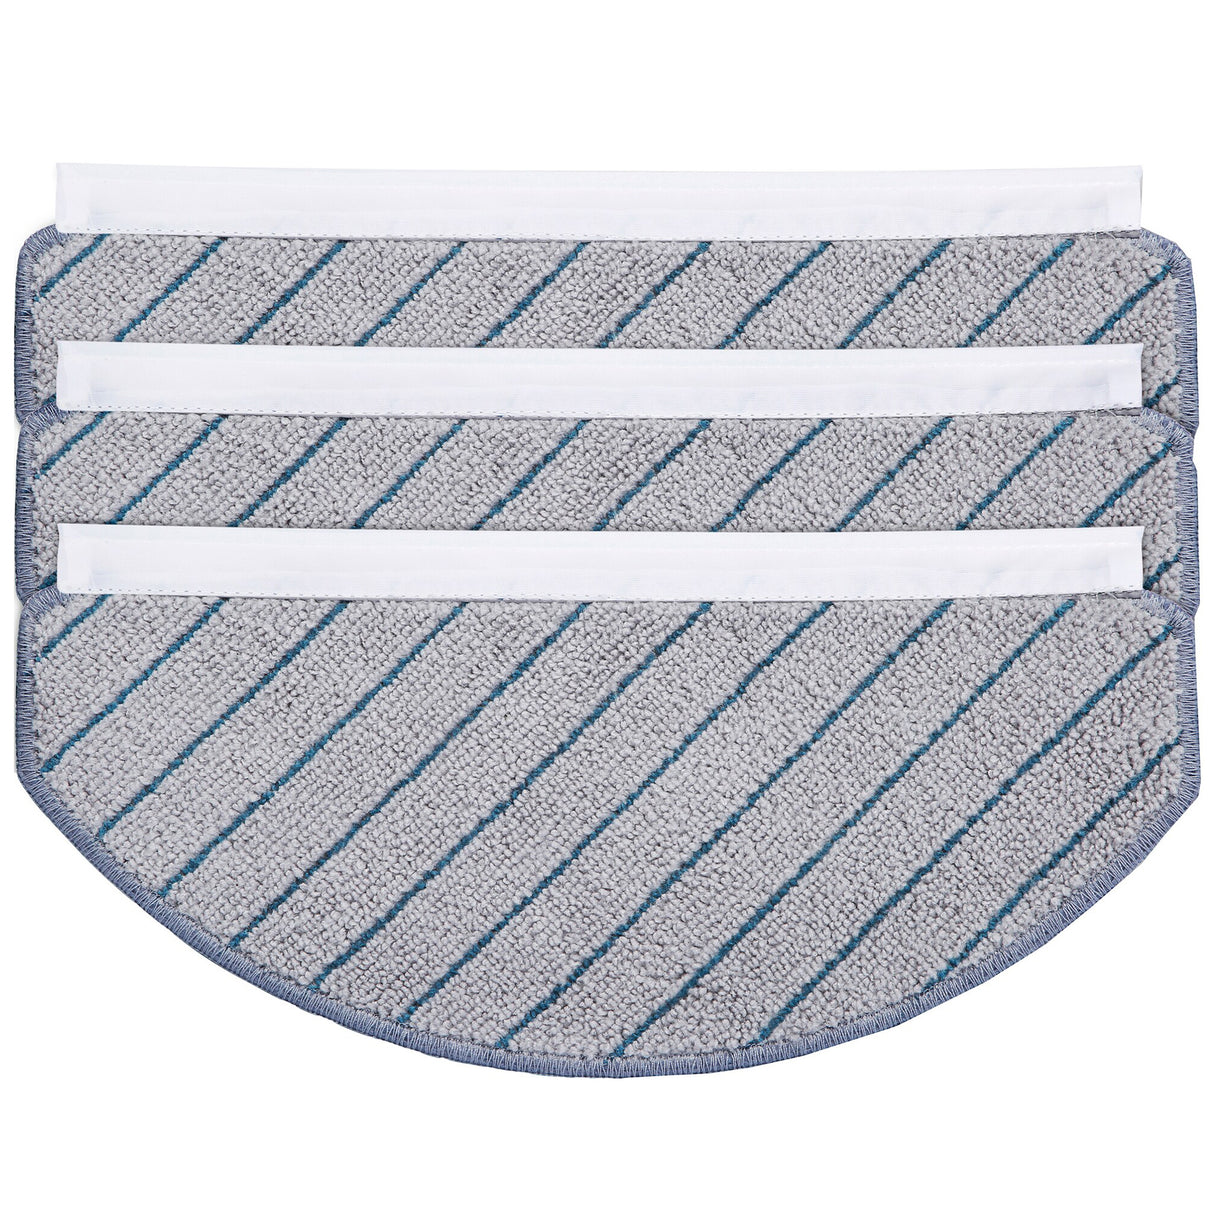 Washable Mopping Cloths for Deebot T10 - Pack of 3 Cloths